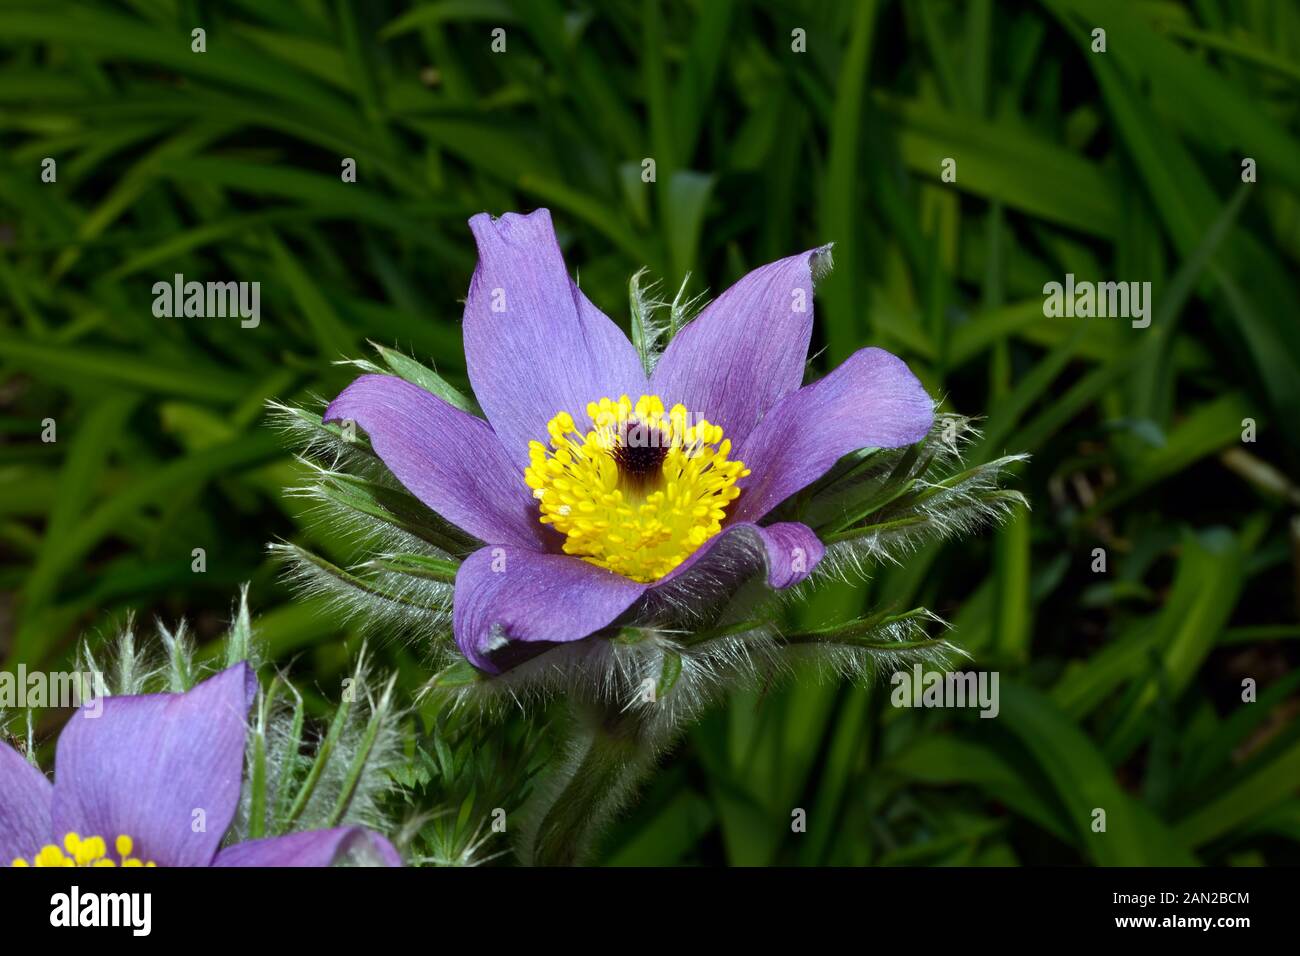 Anemone pulsatilla (pasque flower) is native to Europe growing in  calcareous grassland. Stock Photo